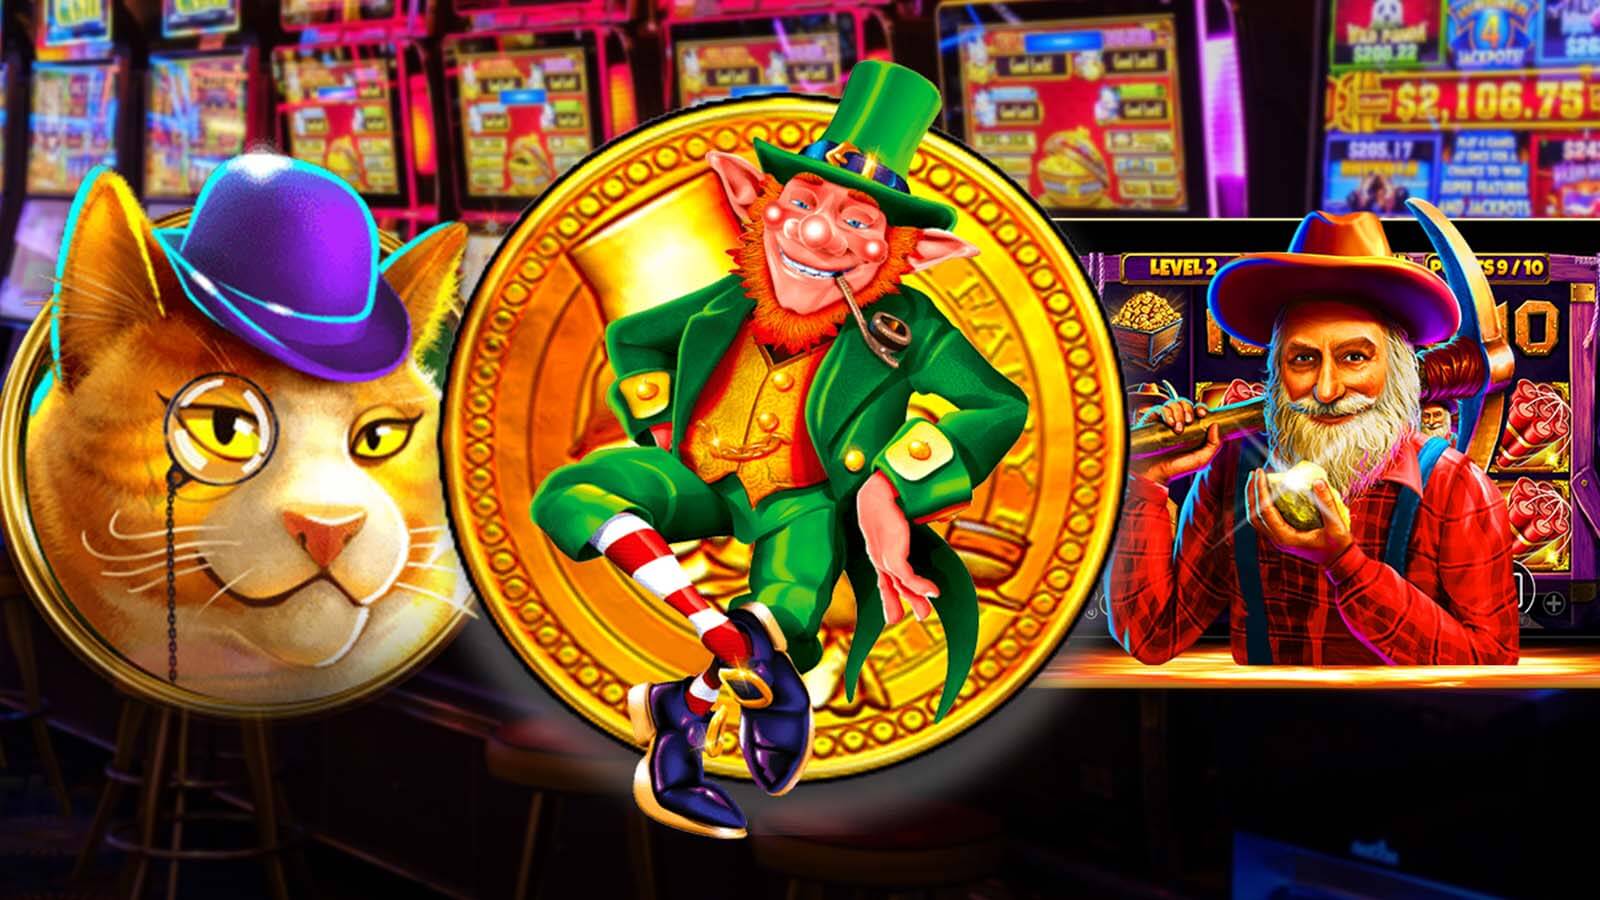 What are the best slot machines to play?